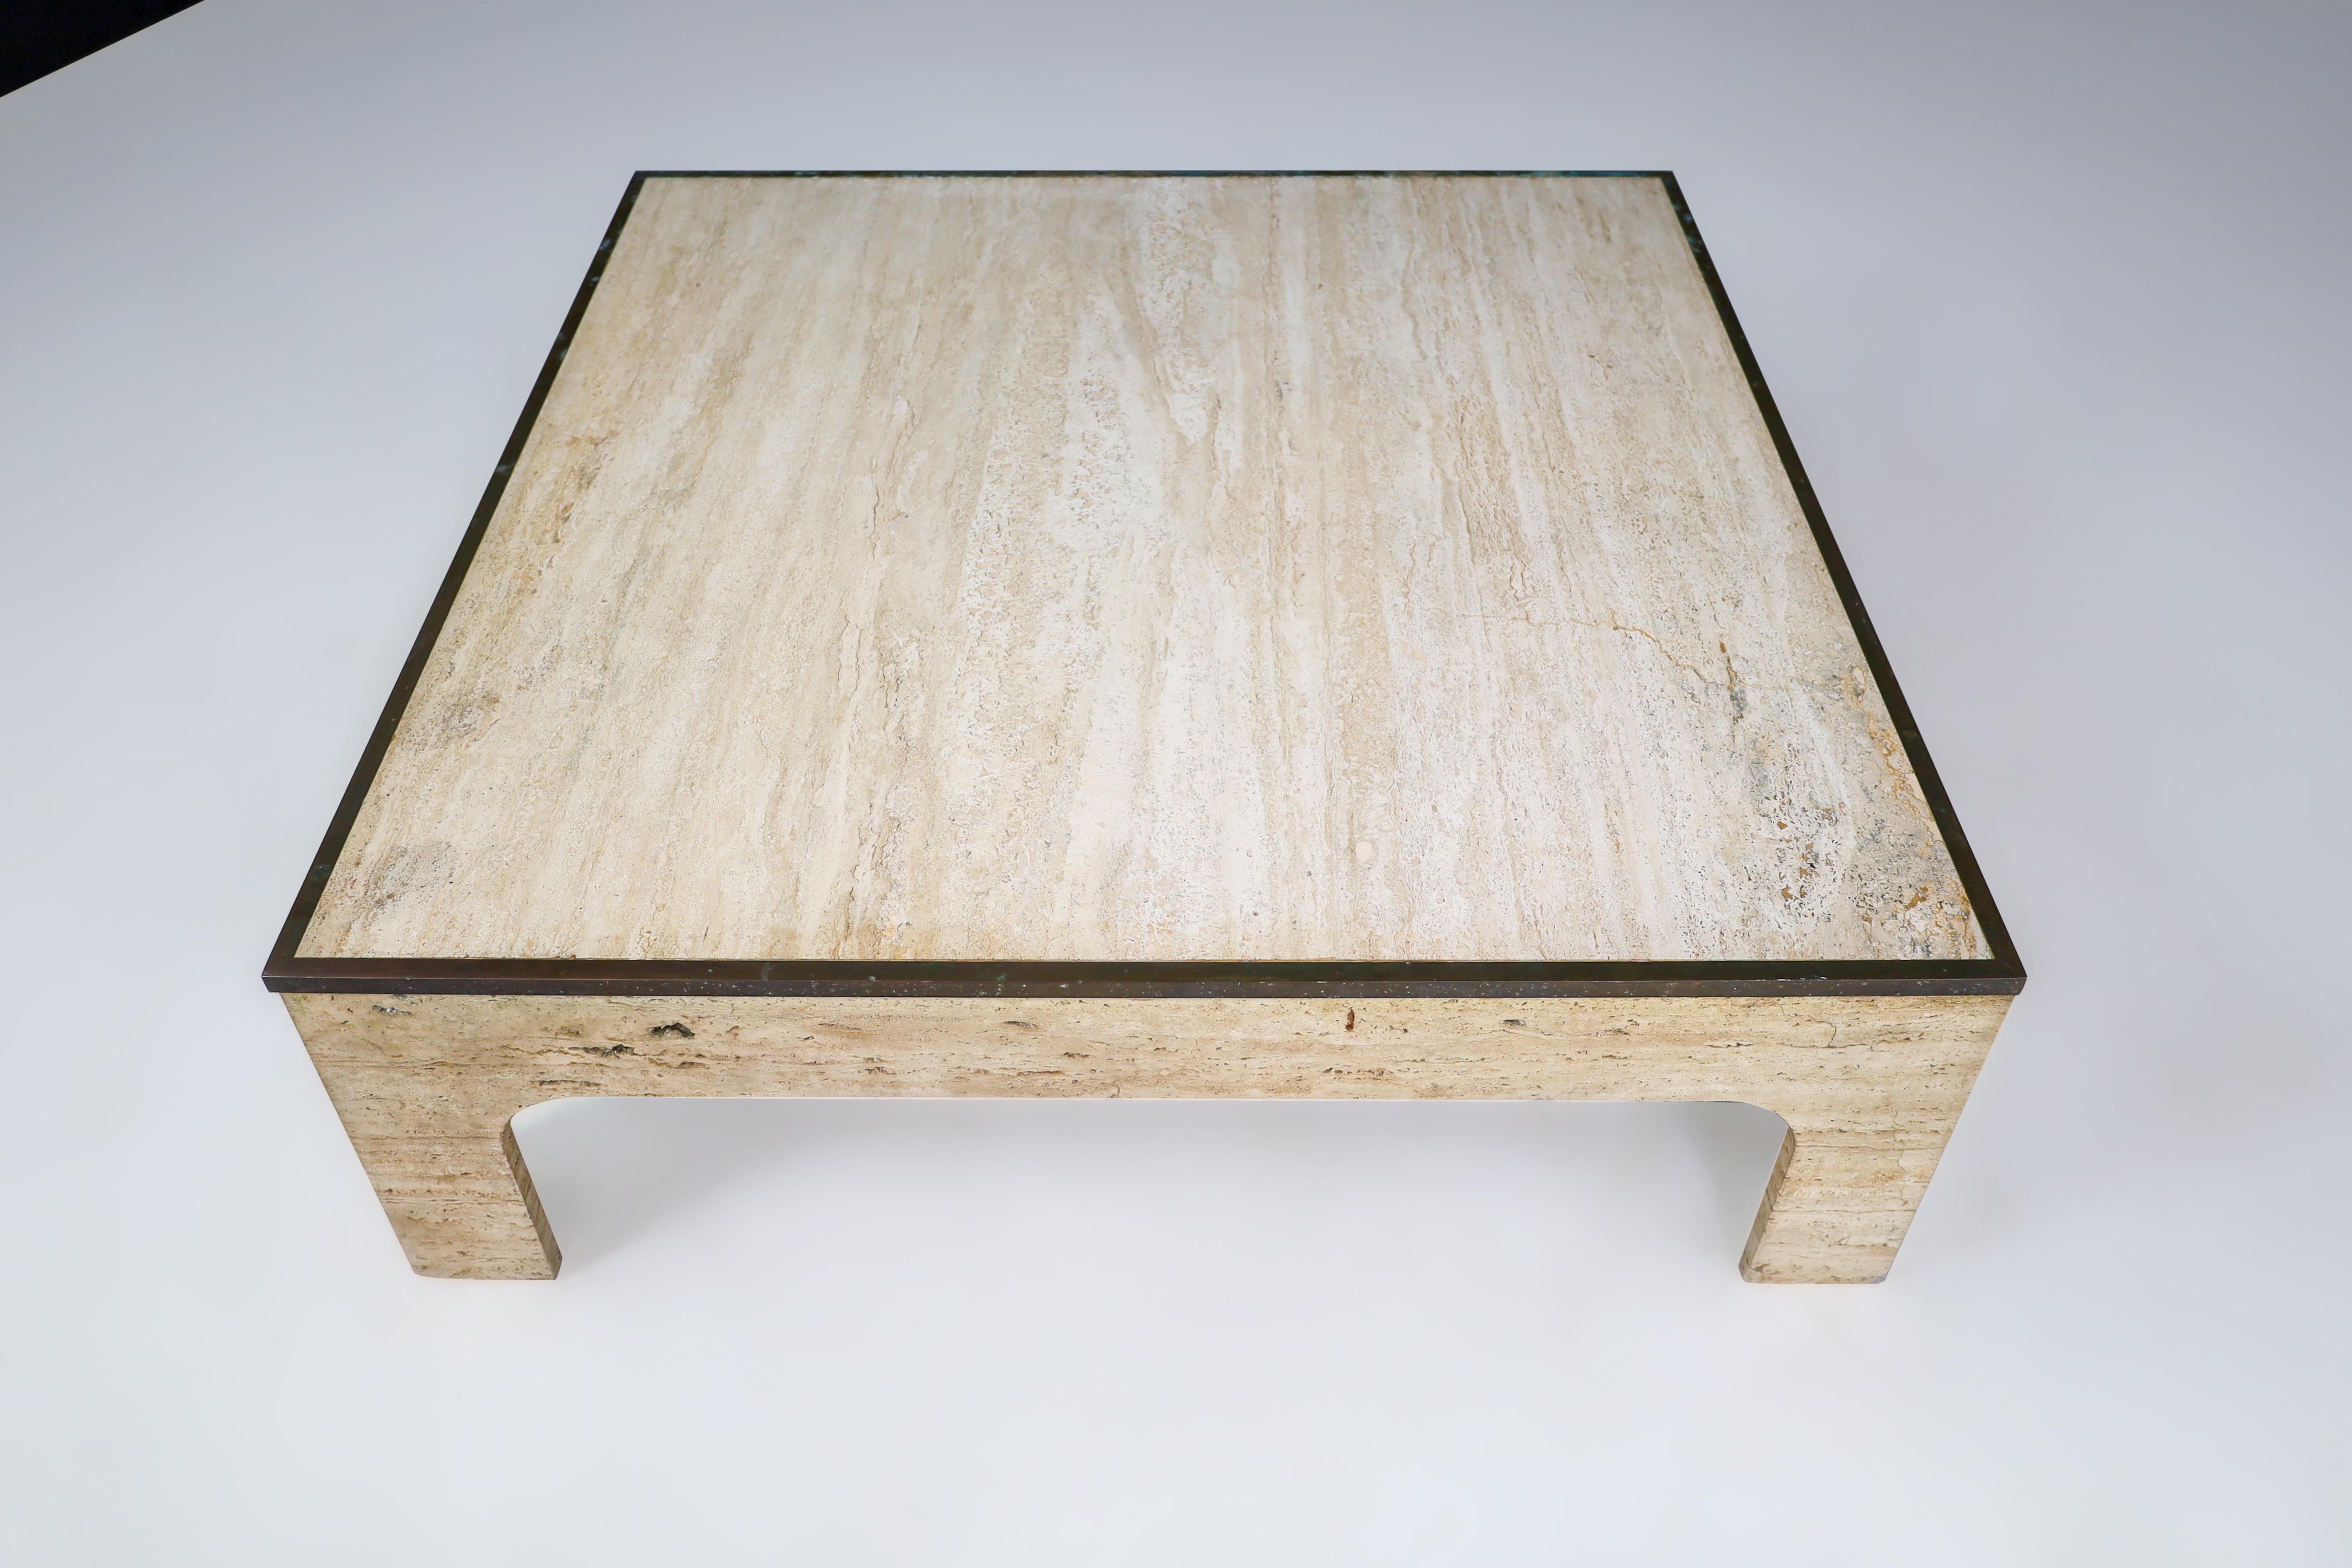 Willy Rizzo Travertine and Patinated Brass Coffee Table Italy 1970s 

This is a Hollywood Regency-style travertine coffee table designed by Willy Rizzo in Italy during the 1970s. The table top is square and made entirely of travertine, while the